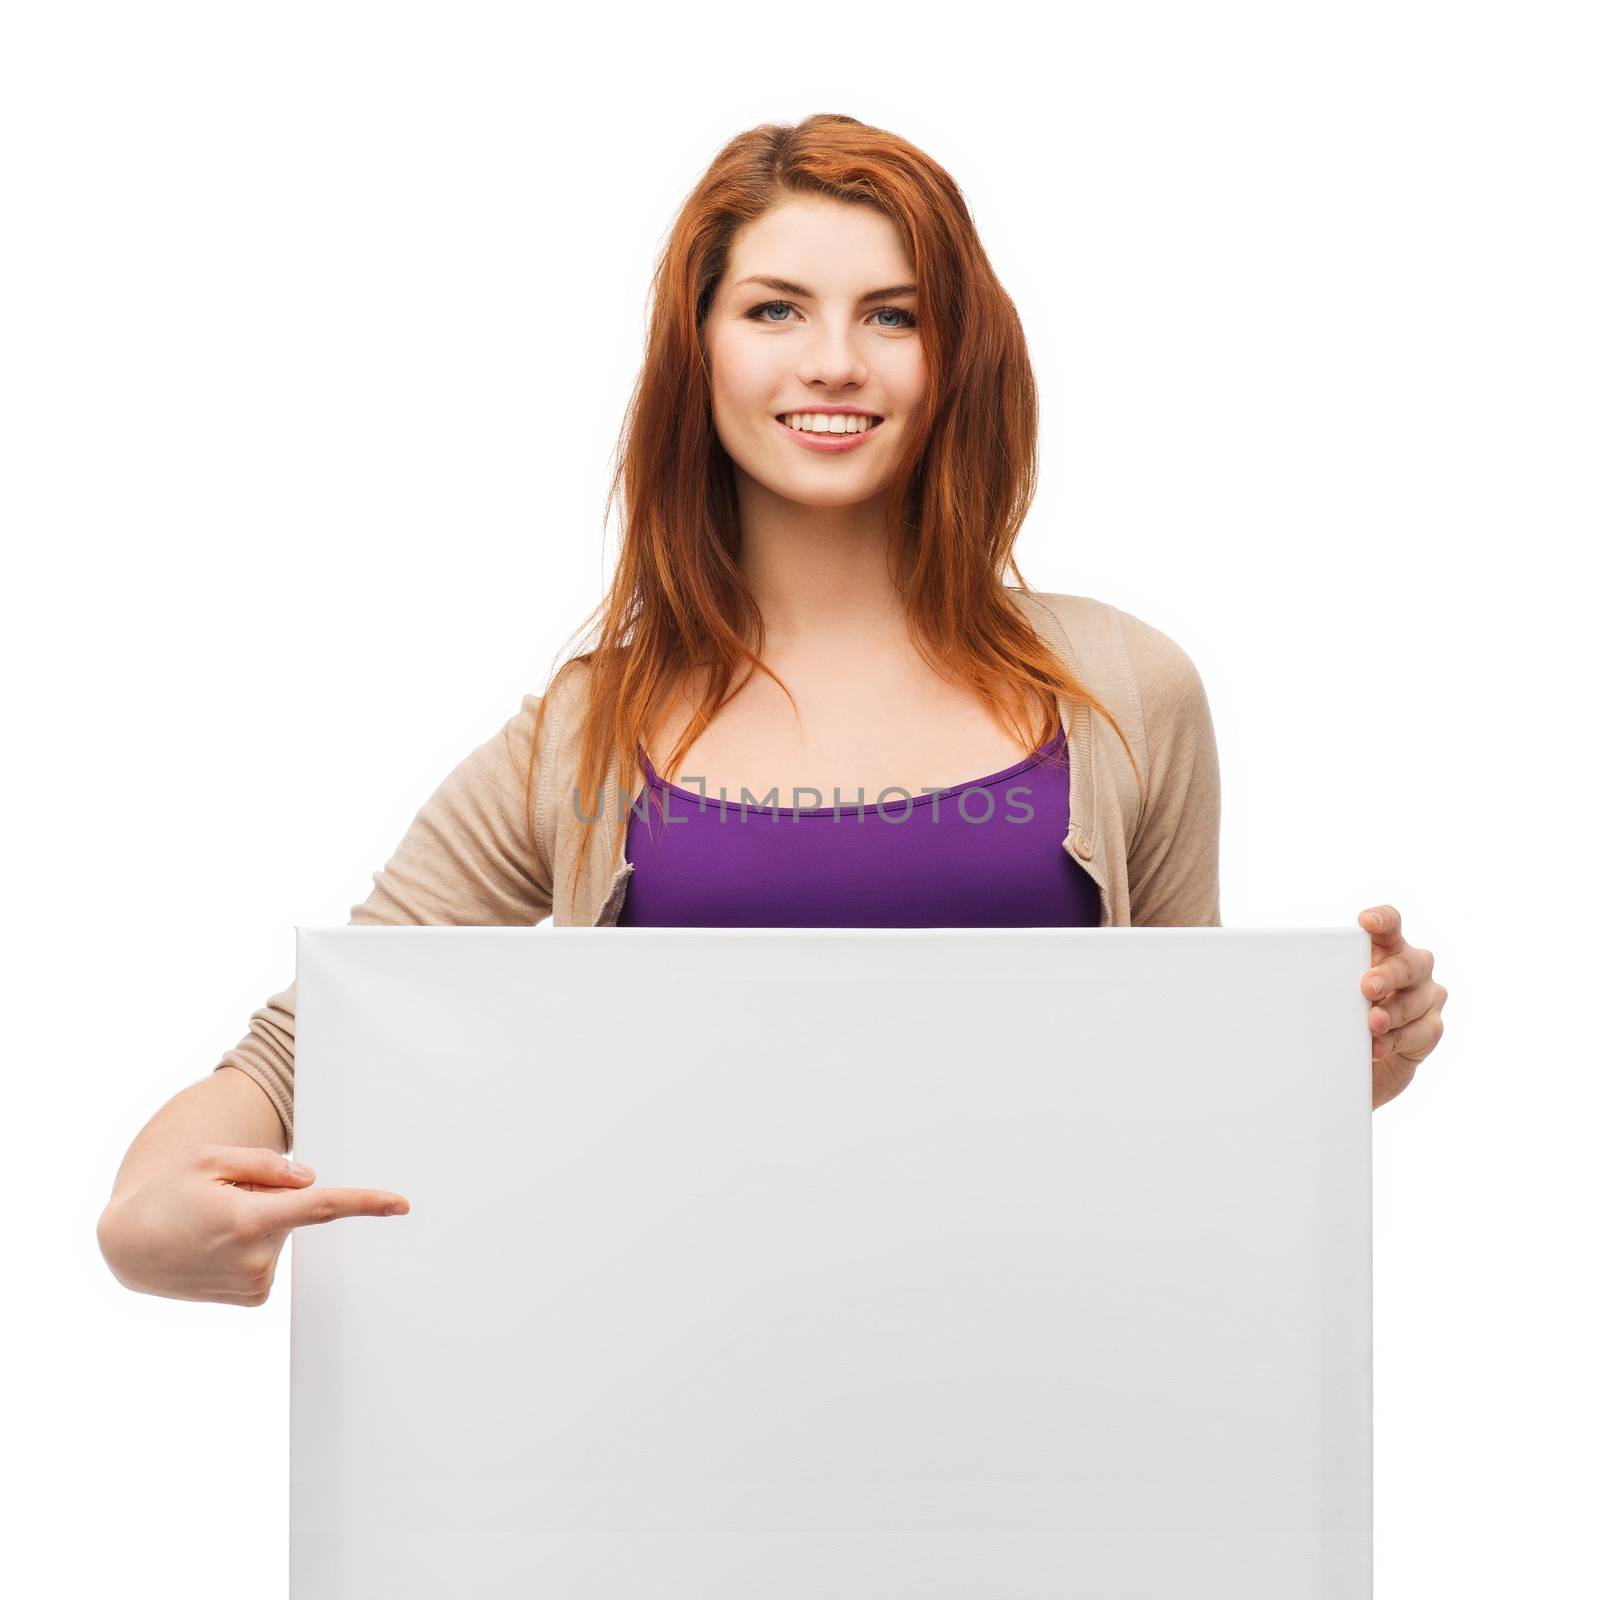 advertisement, sale and people concept - smiling young girl with blank white board